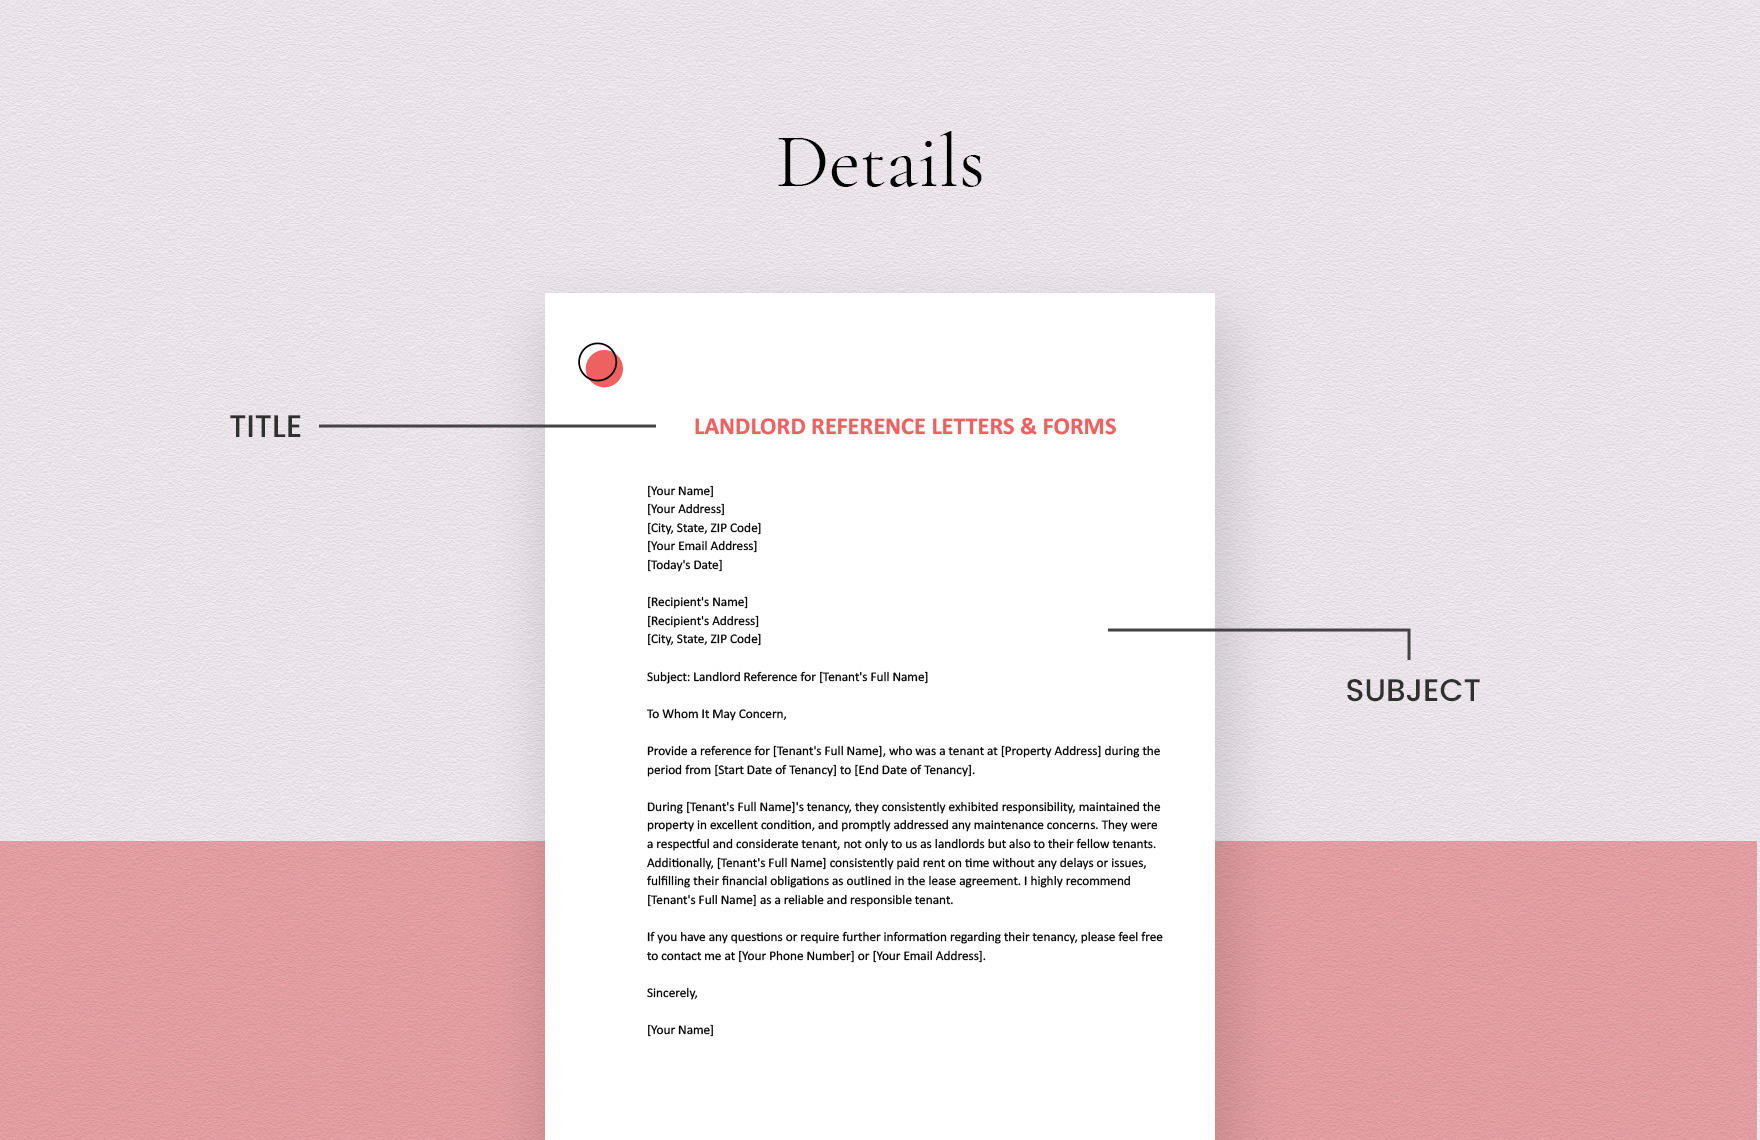 Landlord Reference Letters & Forms